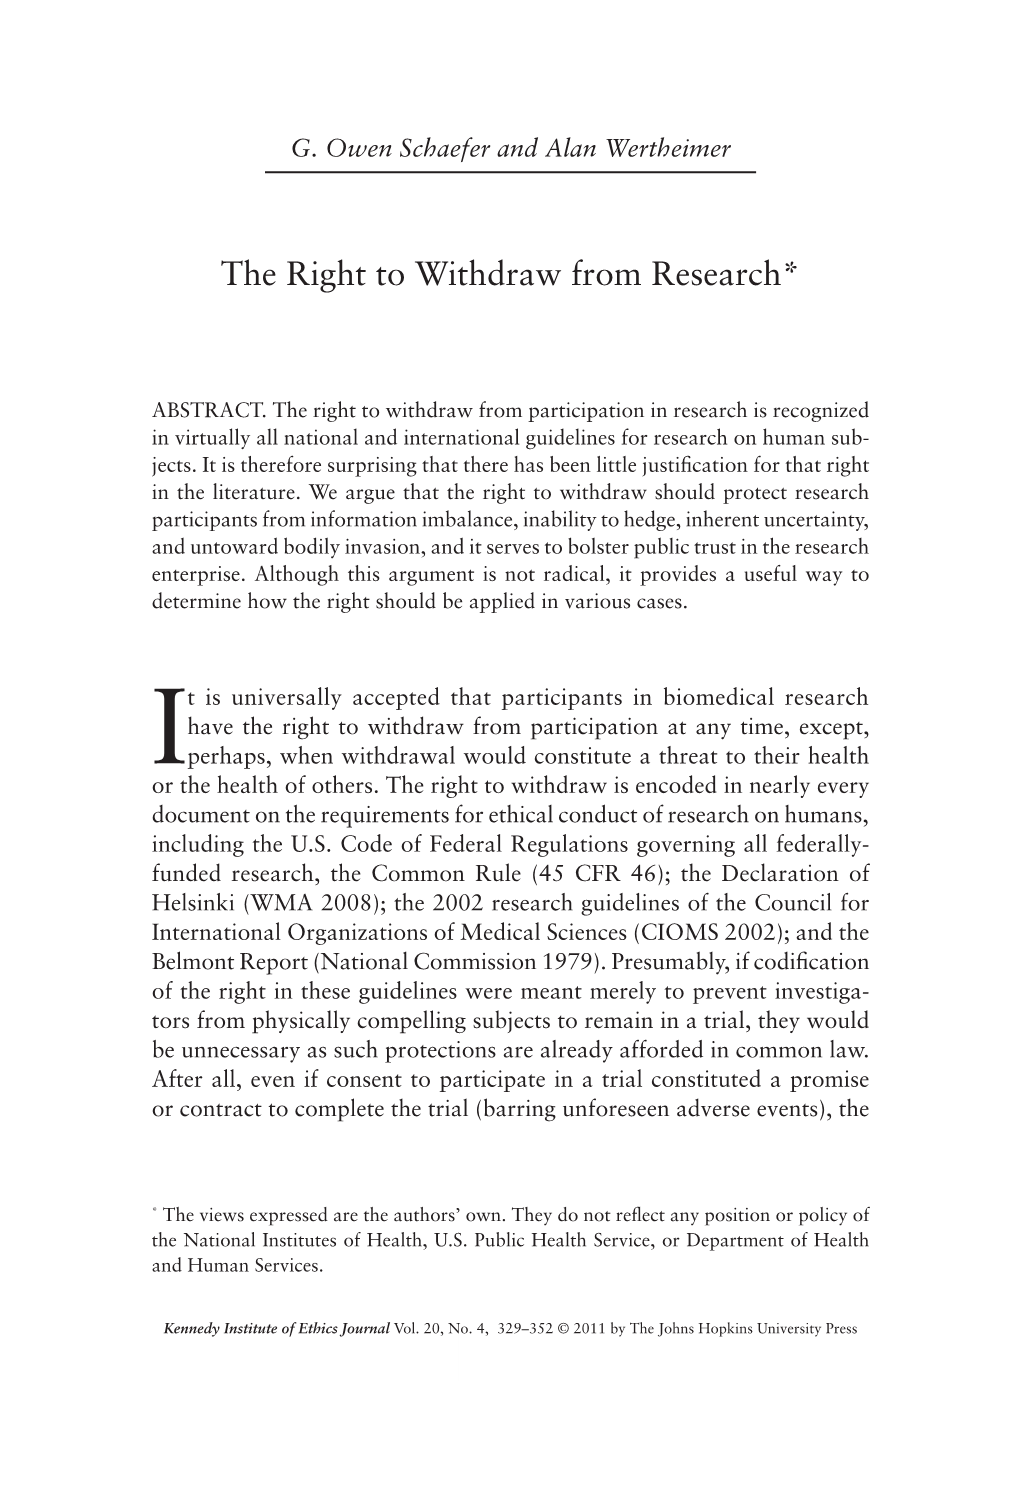 The Right to Withdraw from Research*